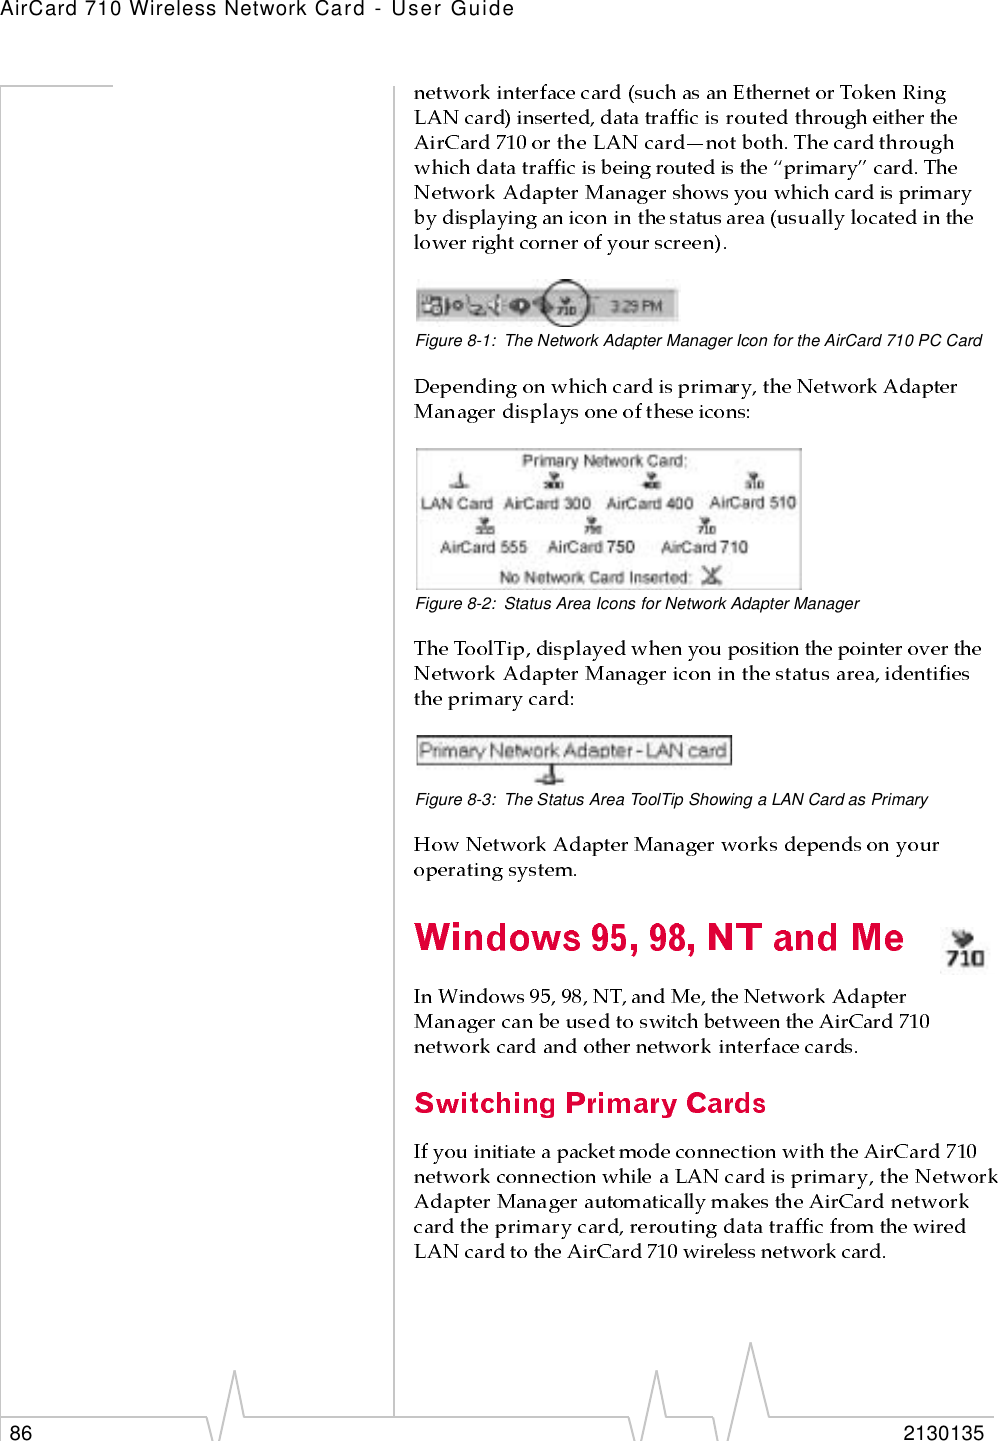 AirCard 710 Wireless Network Card - User Guide86 2130135Figure 8-1: The Network Adapter Manager Icon for the AirCard 710 PC CardFigure 8-2: Status Area Icons for Network Adapter ManagerFigure 8-3: The Status Area ToolTip Showing a LAN Card as Primary